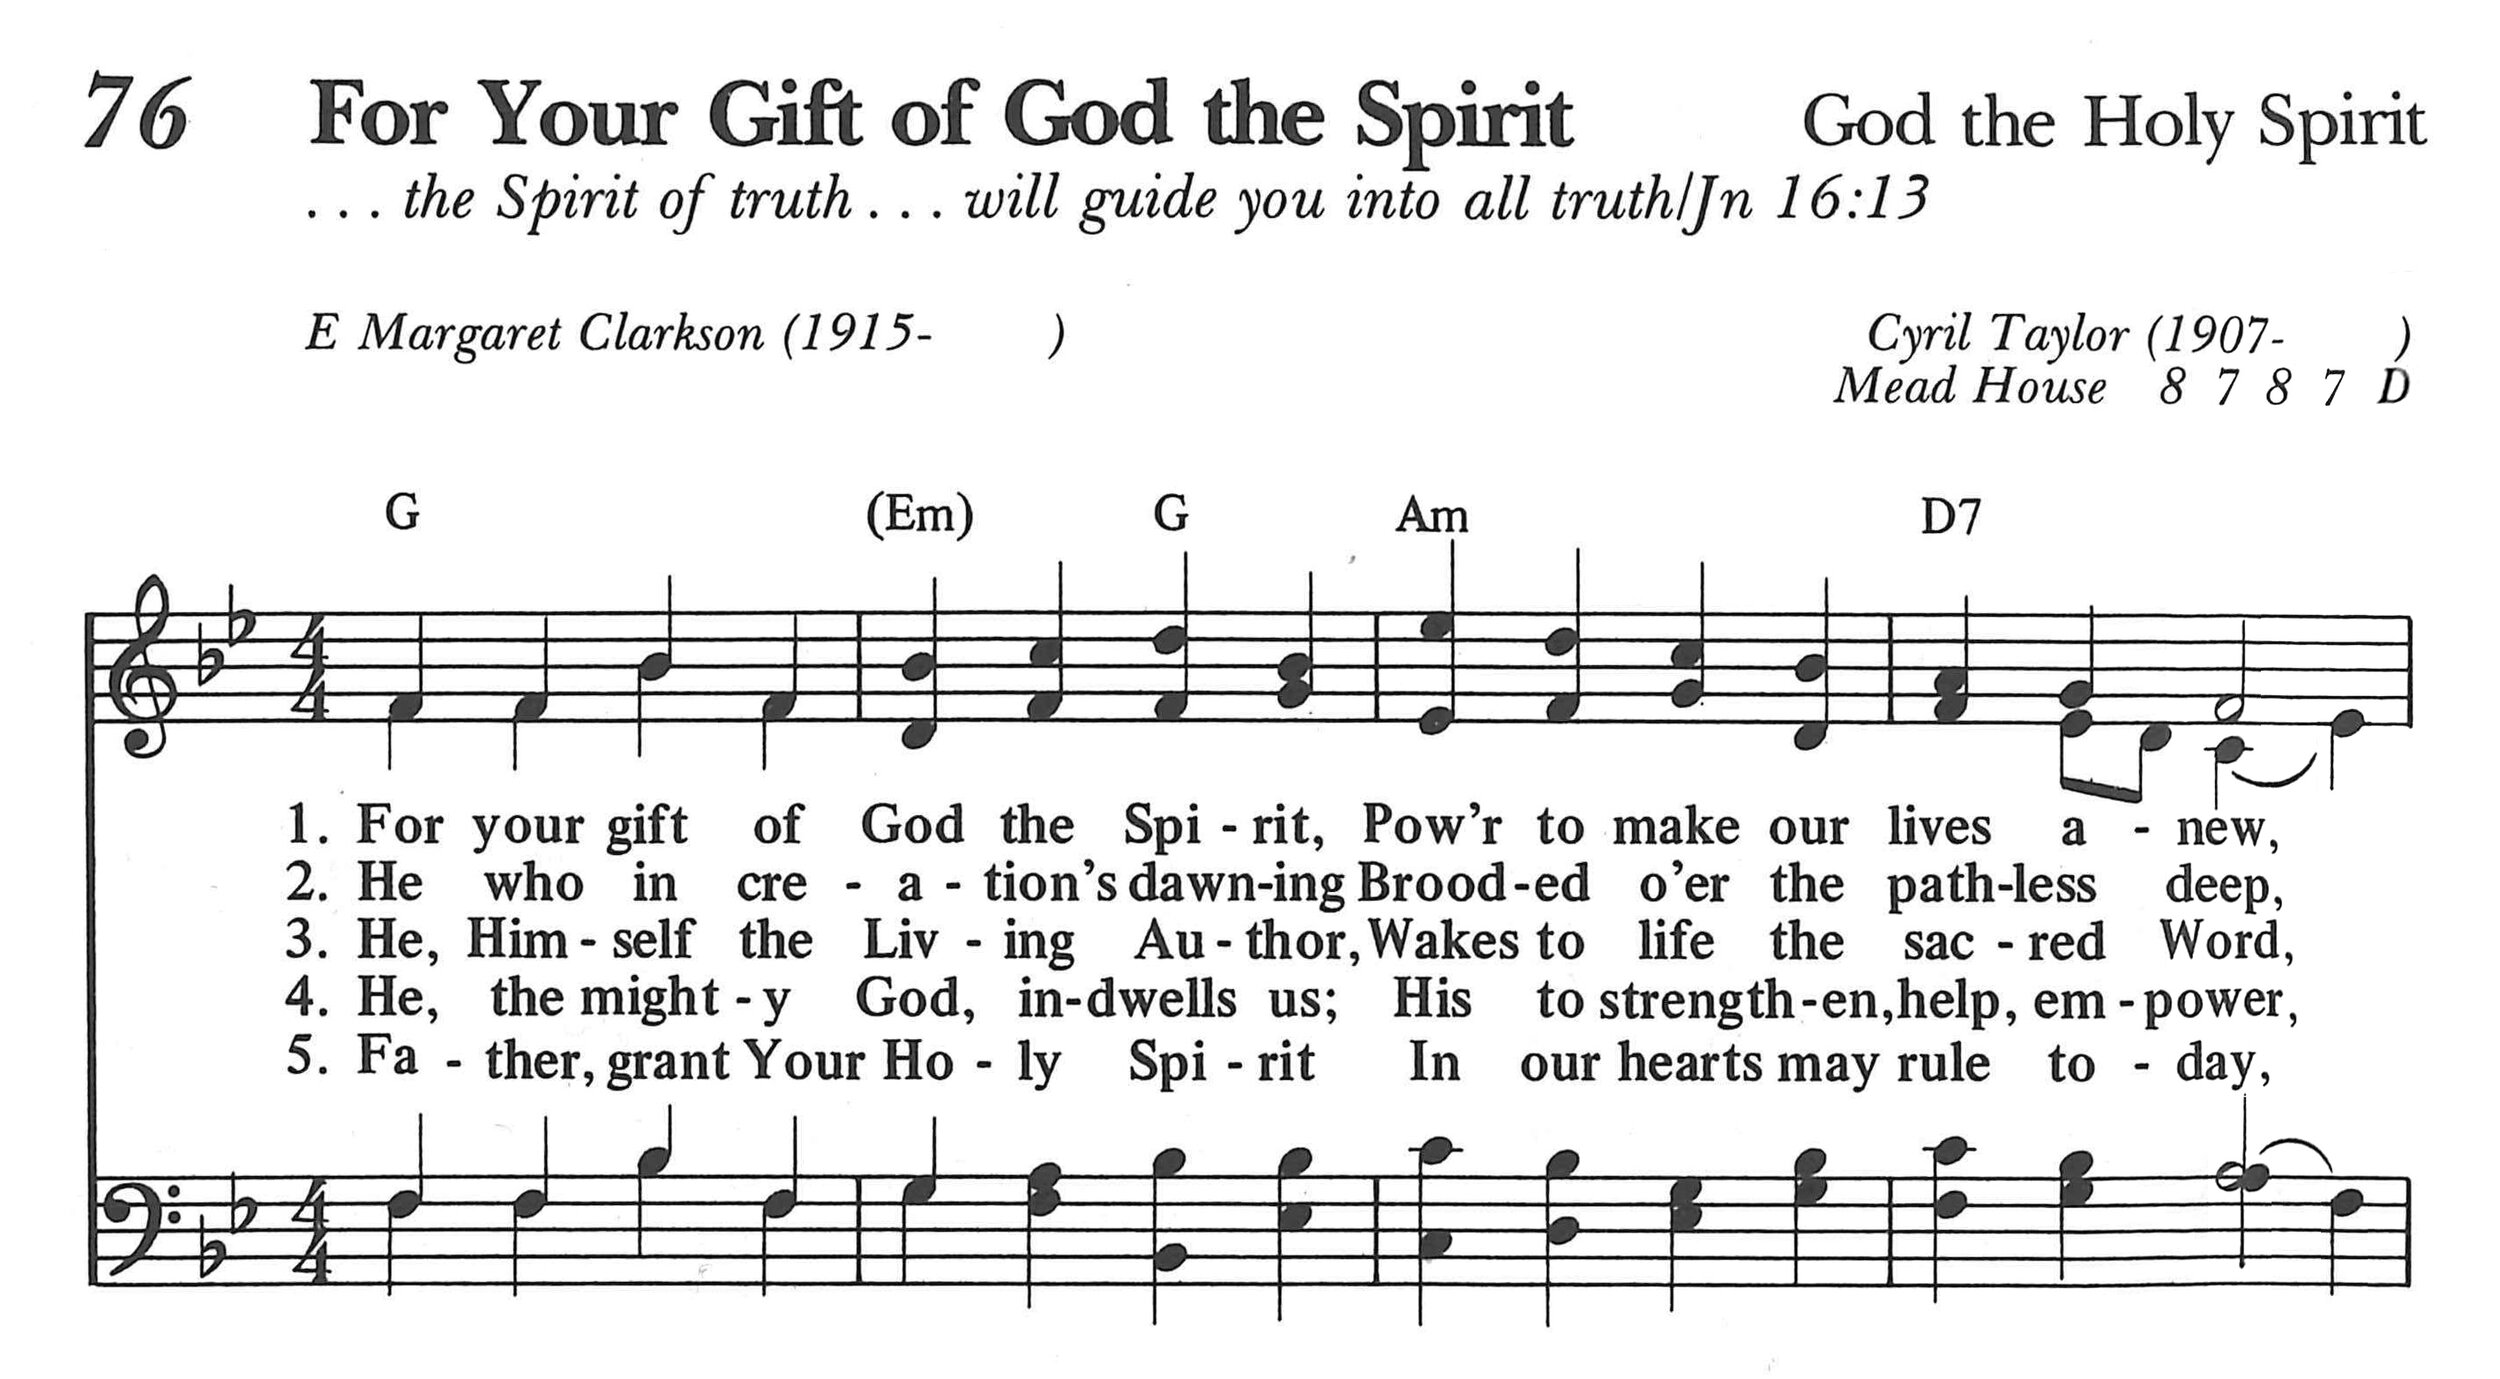 A Hymn to Beauty, the Transcendent Gift from God